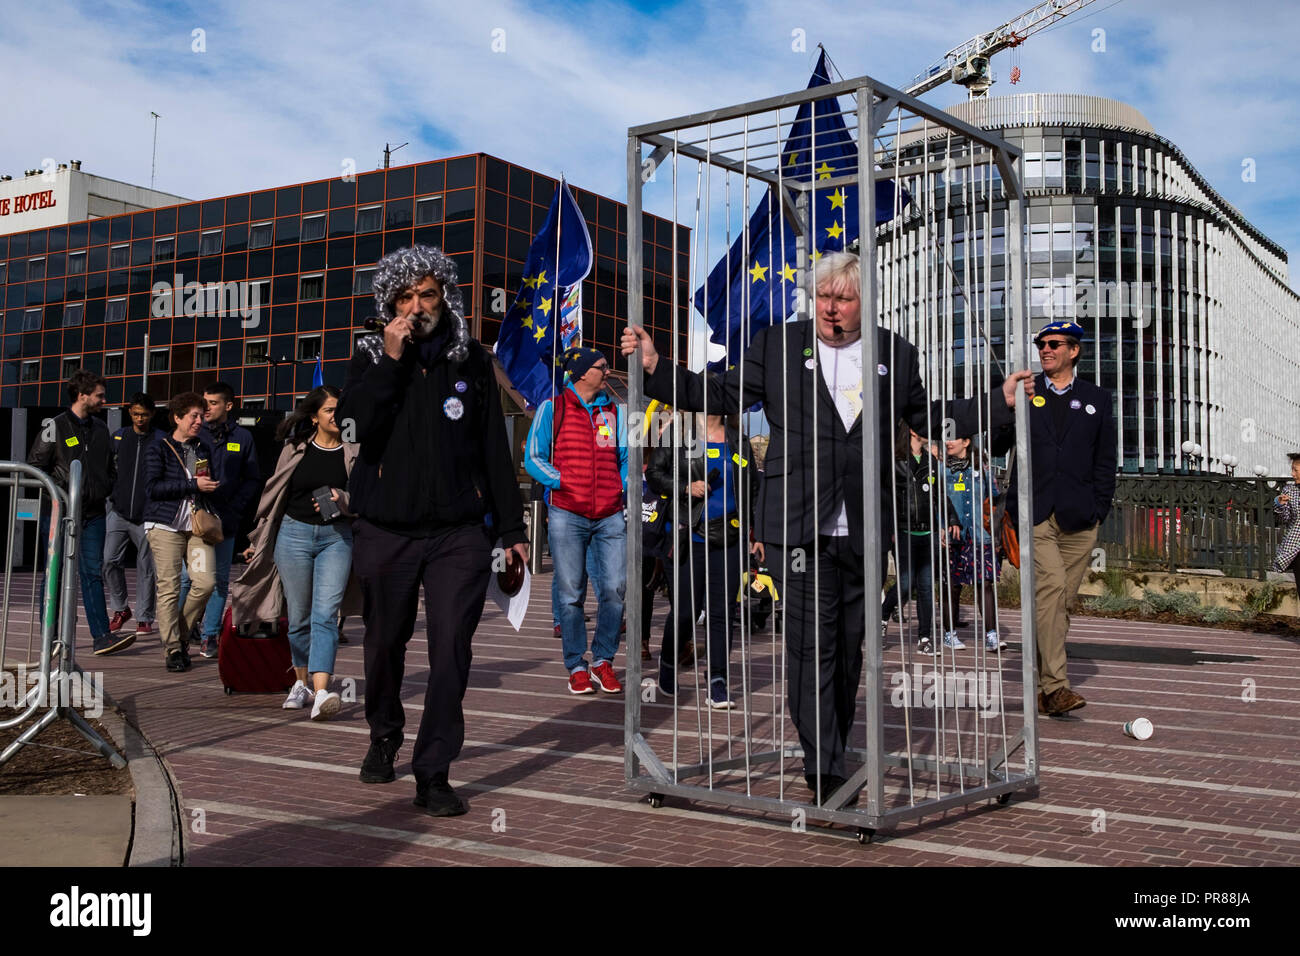 Birmingham, UK 30th September 2018. A jailed 'Boris Johnson' is paraded through the streets of Birmingham during an anti Brexit protest, locked up for crimes against human decency (C) Paul Swinney/Alamy Live News Stock Photo